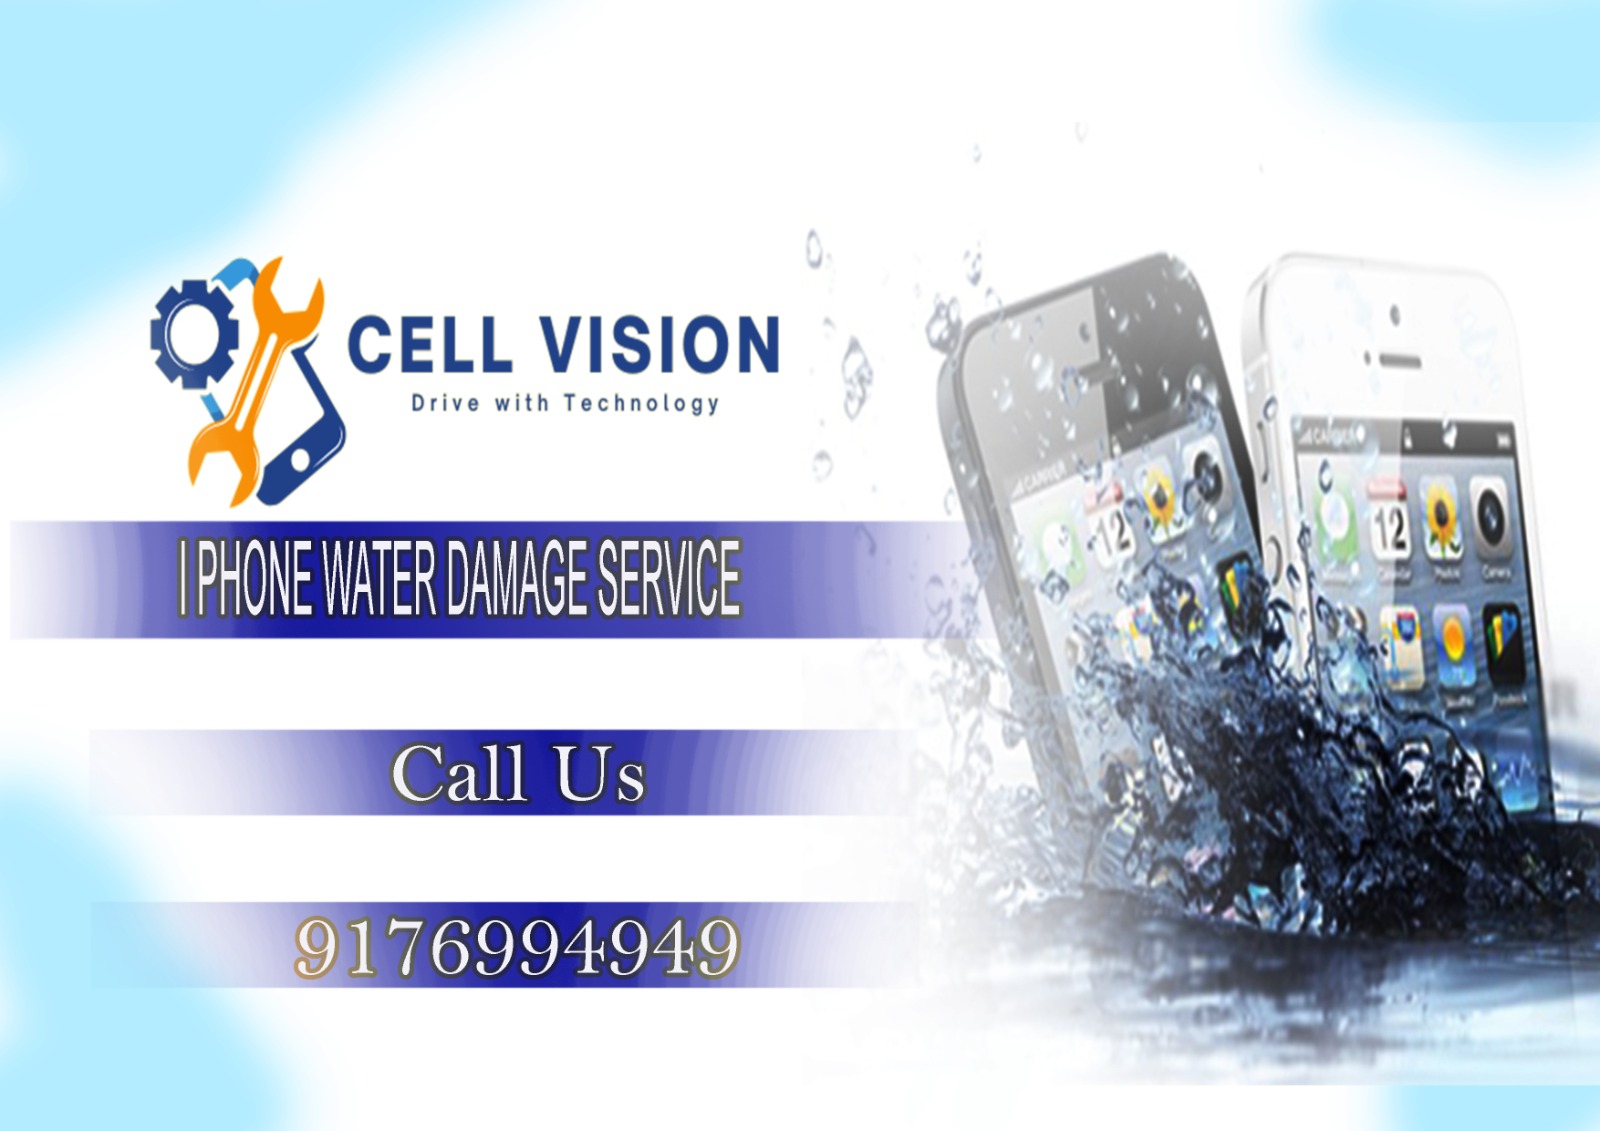 Cell Vision Apple Iphone Repair Services in Chennai